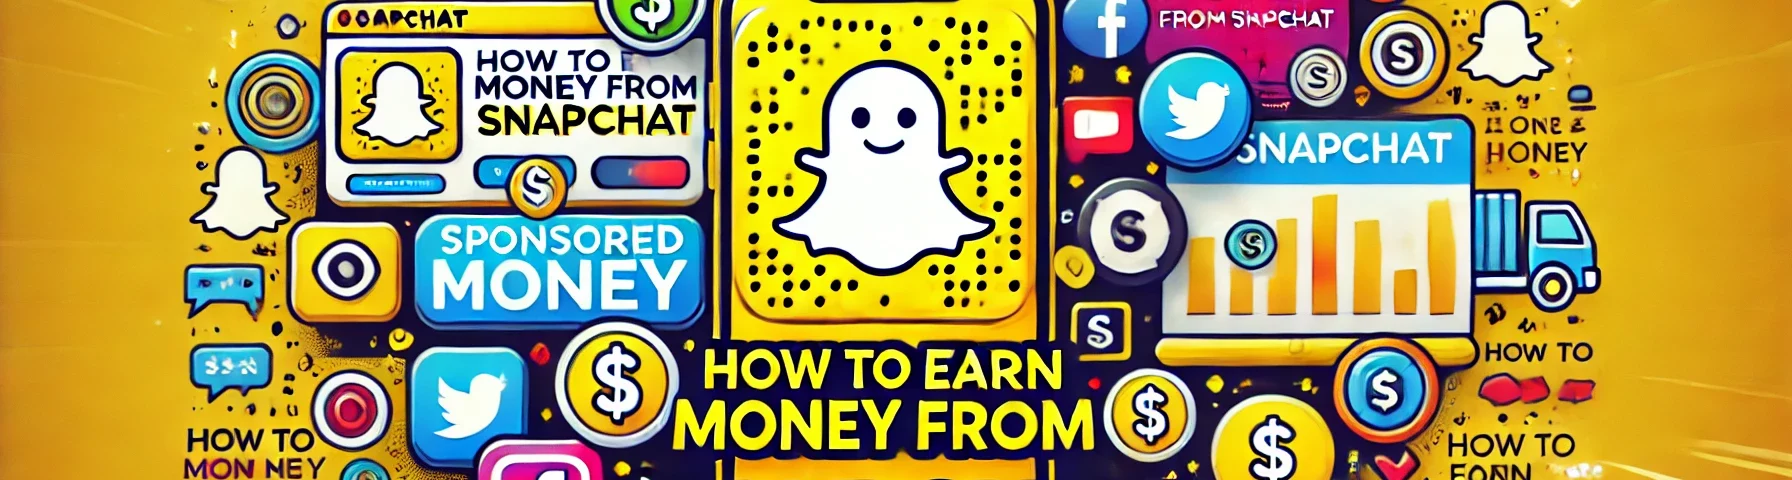 How to Earn Money from Snapchat